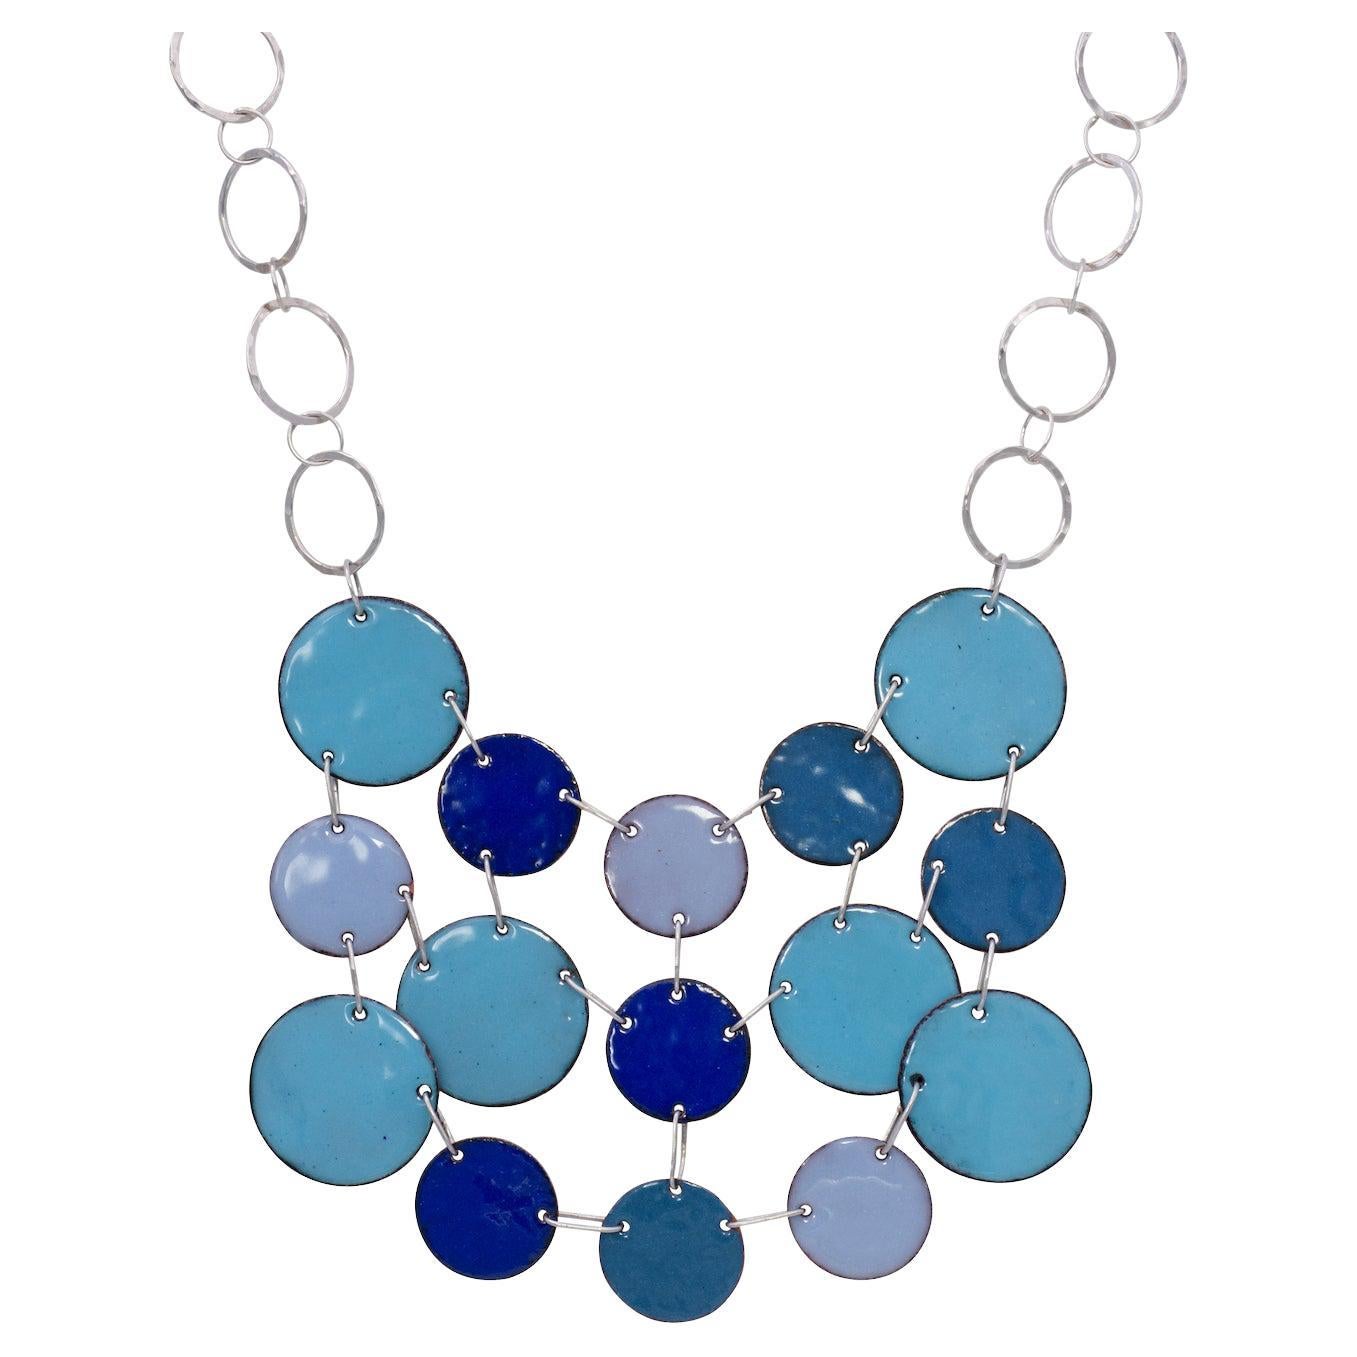 Shades of Blue Sterling Silver Bib Necklace with Enamel Hand painted  Discs.